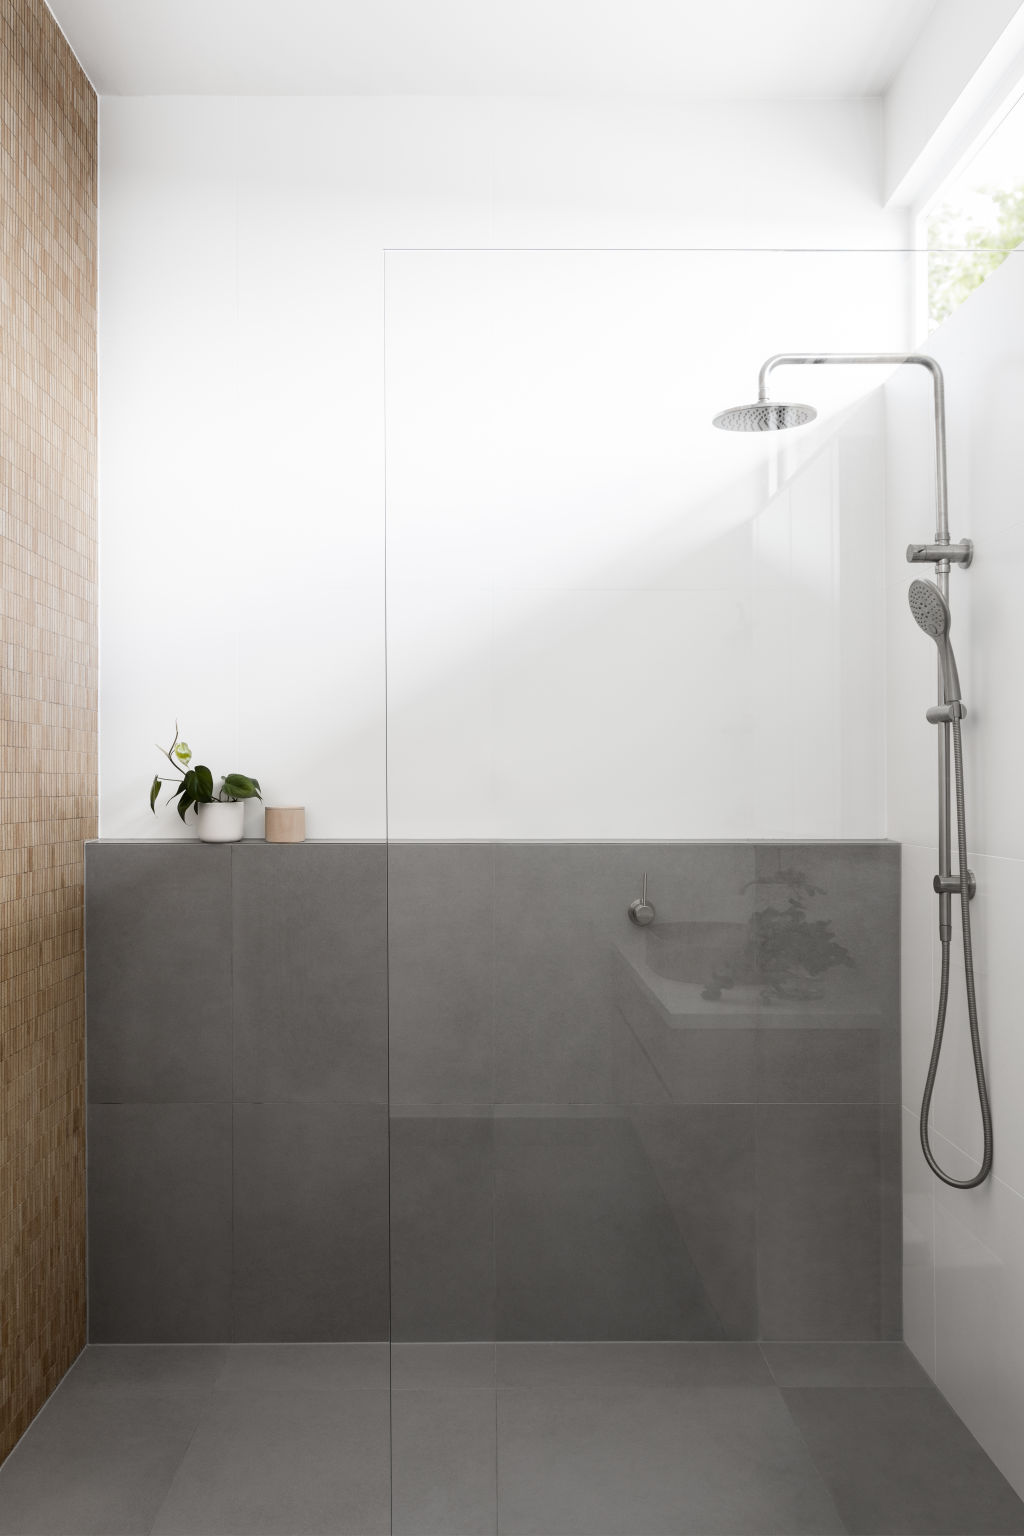 Perfectly practical ledges that run the length of the shower. Fairfield house by Heartly interior design studio. Photo: Martina Gemmola